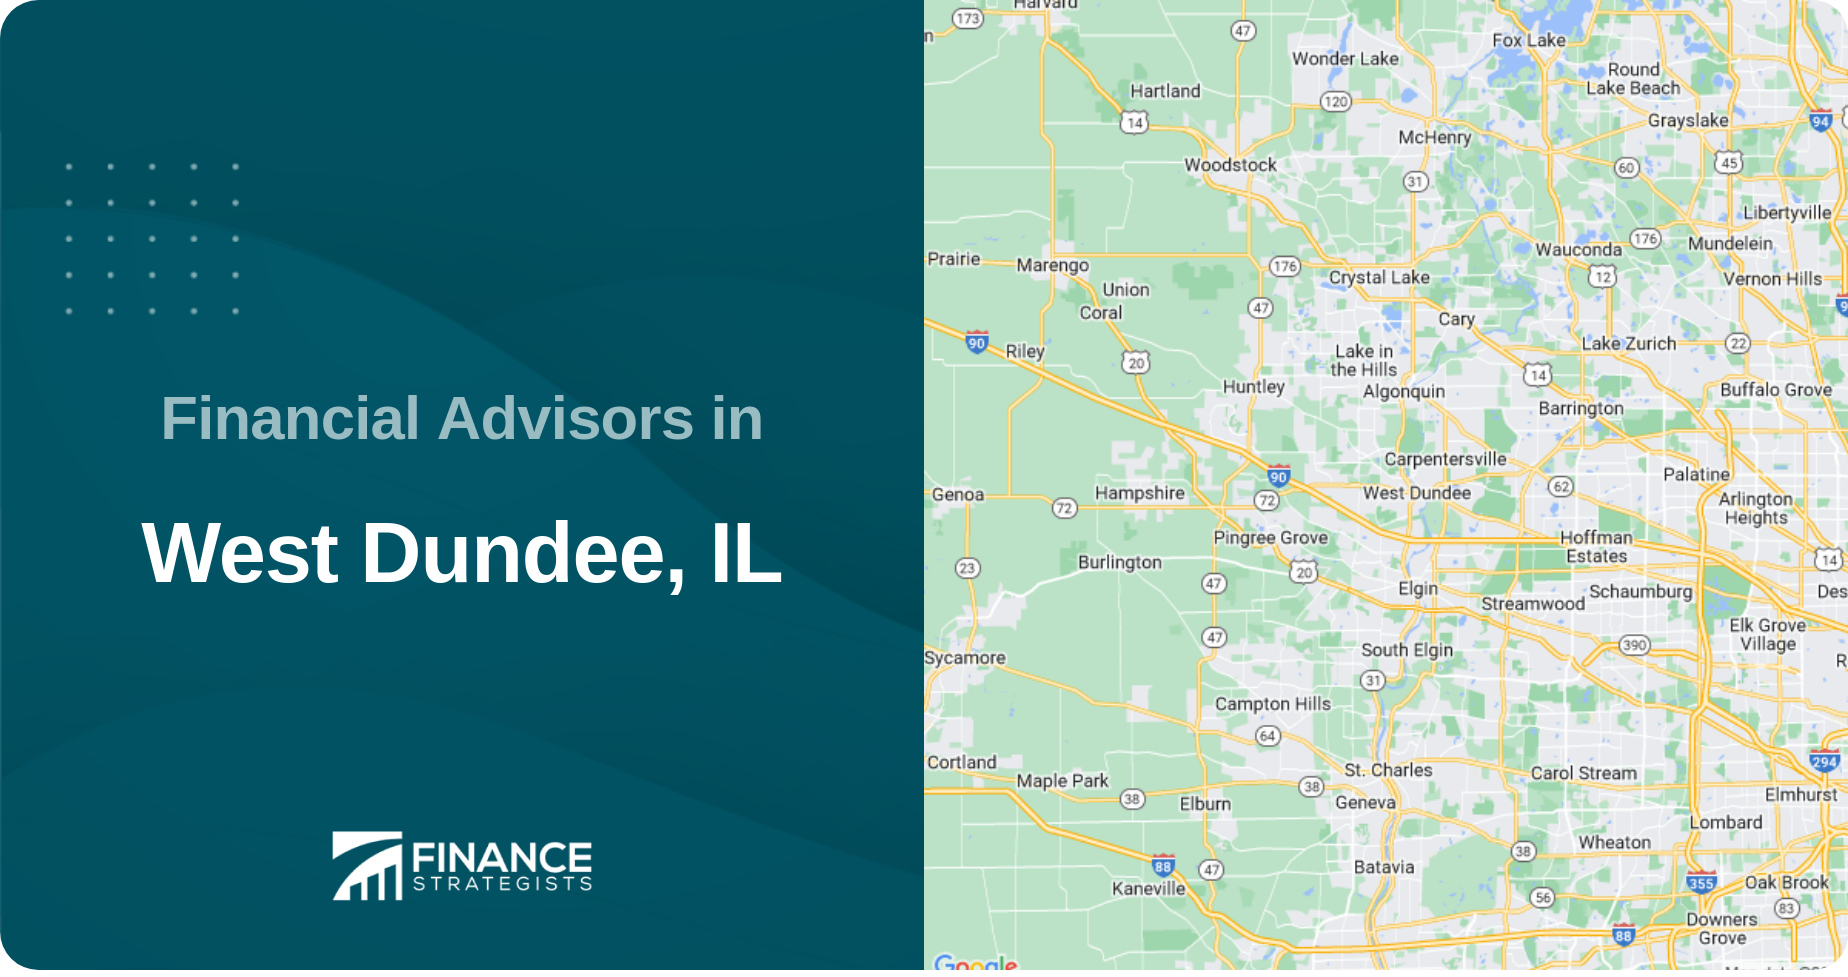 Financial Advisors in West Dundee, IL